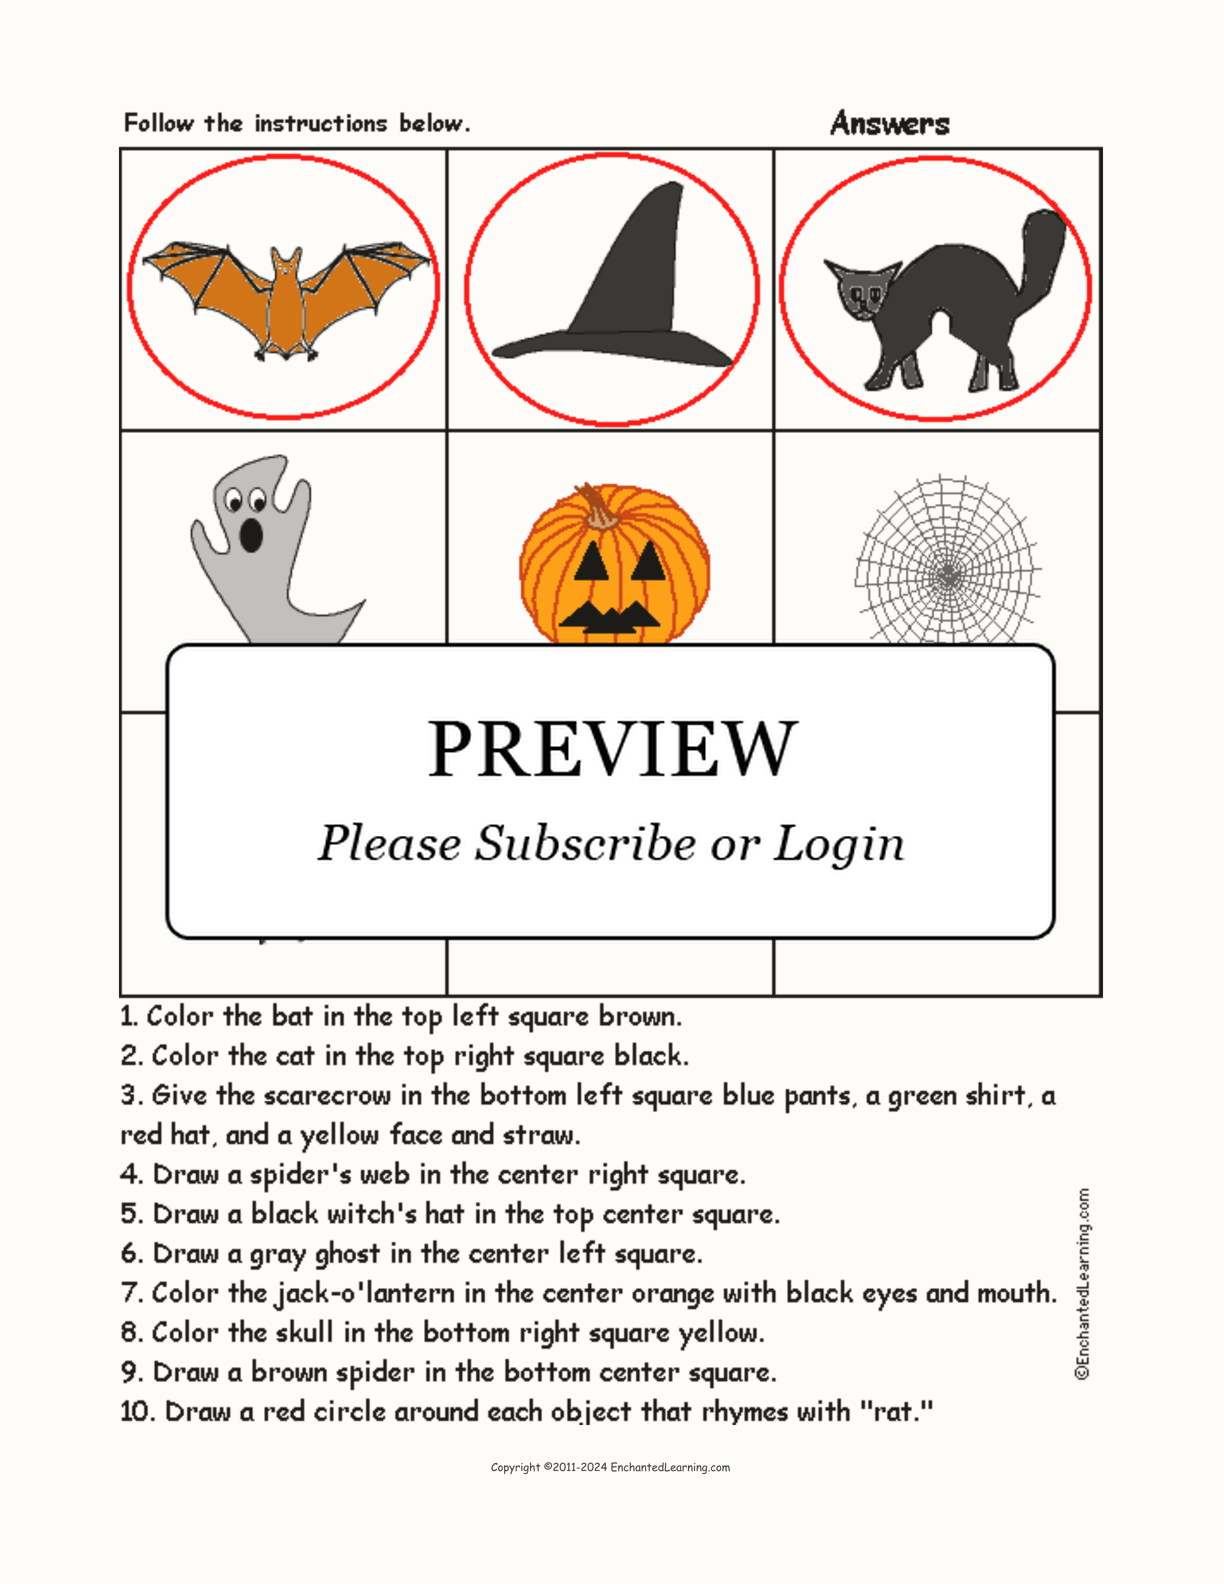 Halloween - Follow the Instructions interactive worksheet page 2